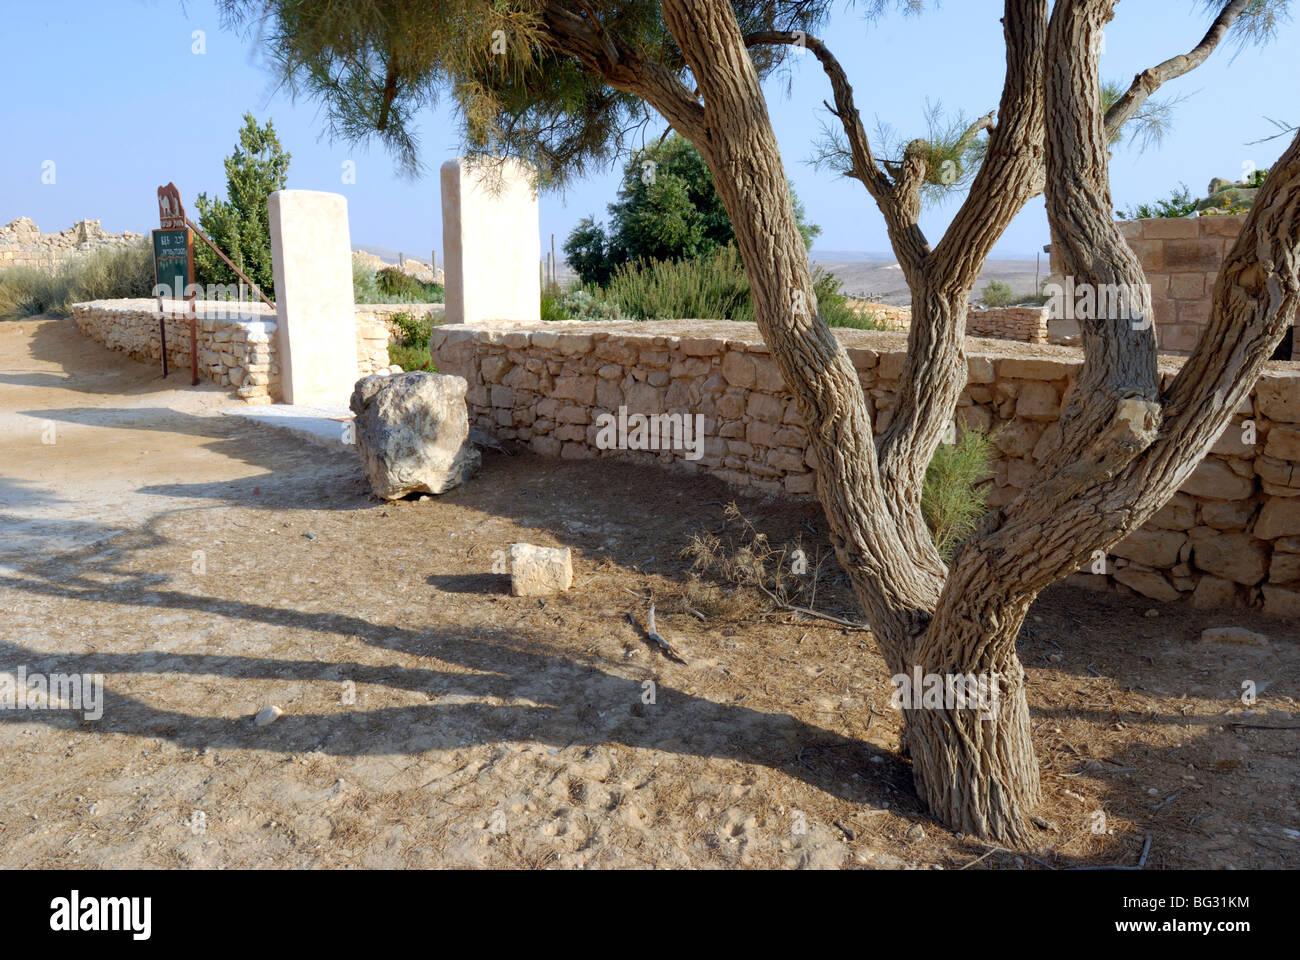 Israel, Negev, Shivta, a modern house built from local material using traditional building methods Stock Photo